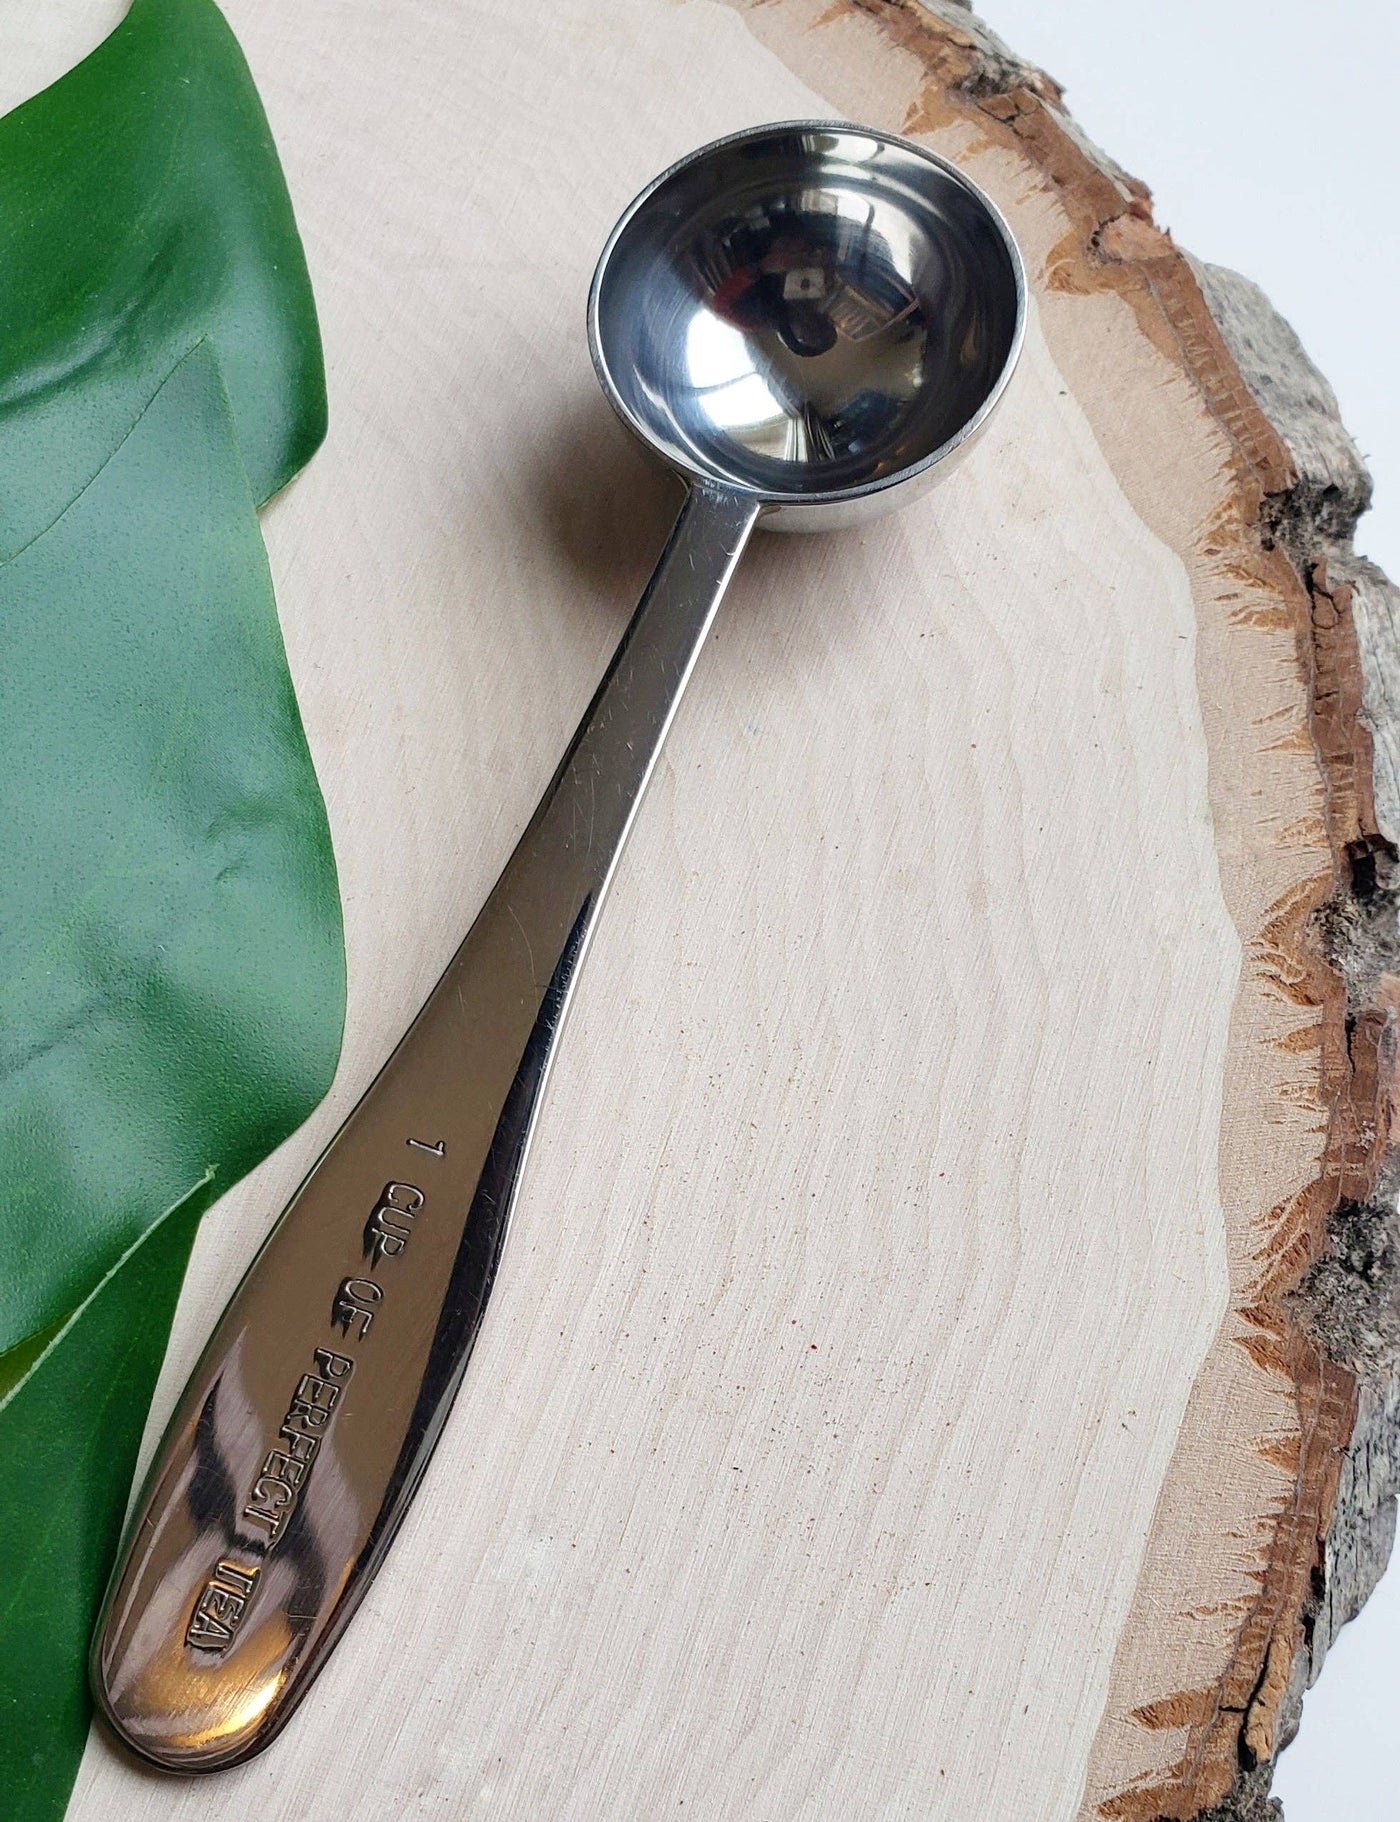 The "Perfect Cup" Teaspoon